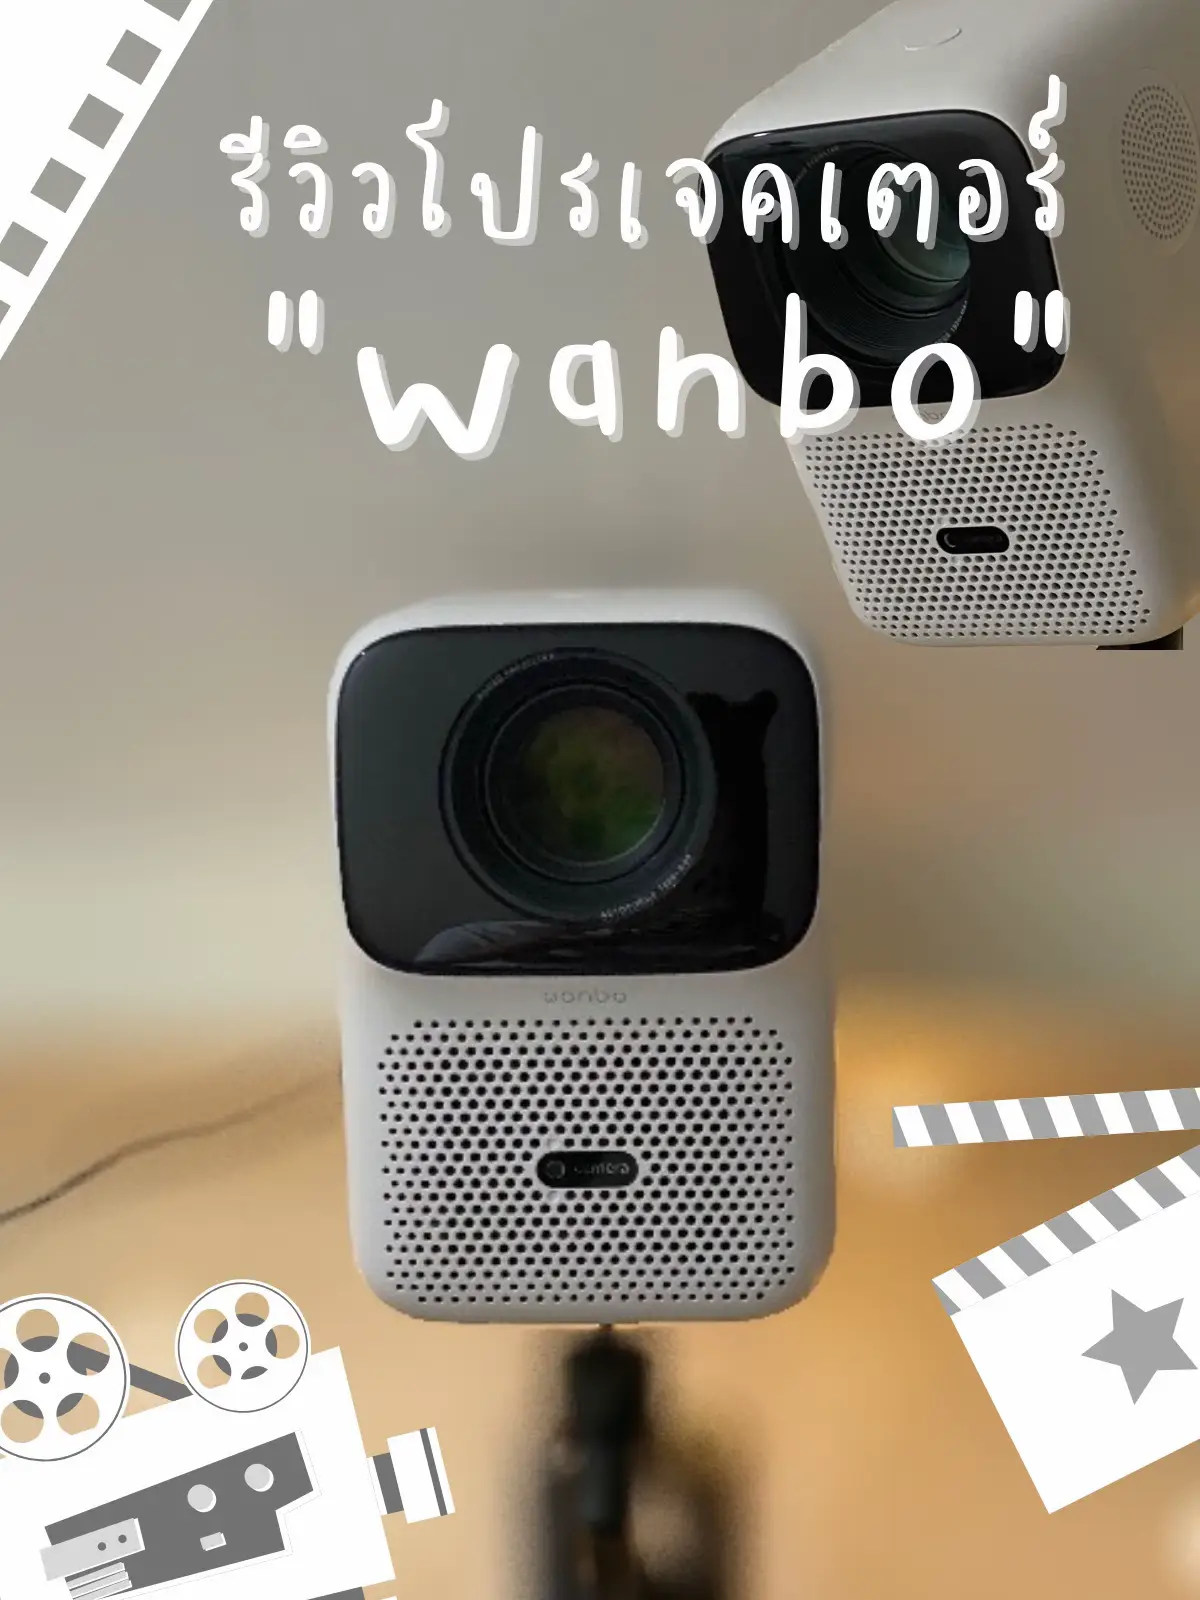 Wanbo projector equipped with the latest technology in the